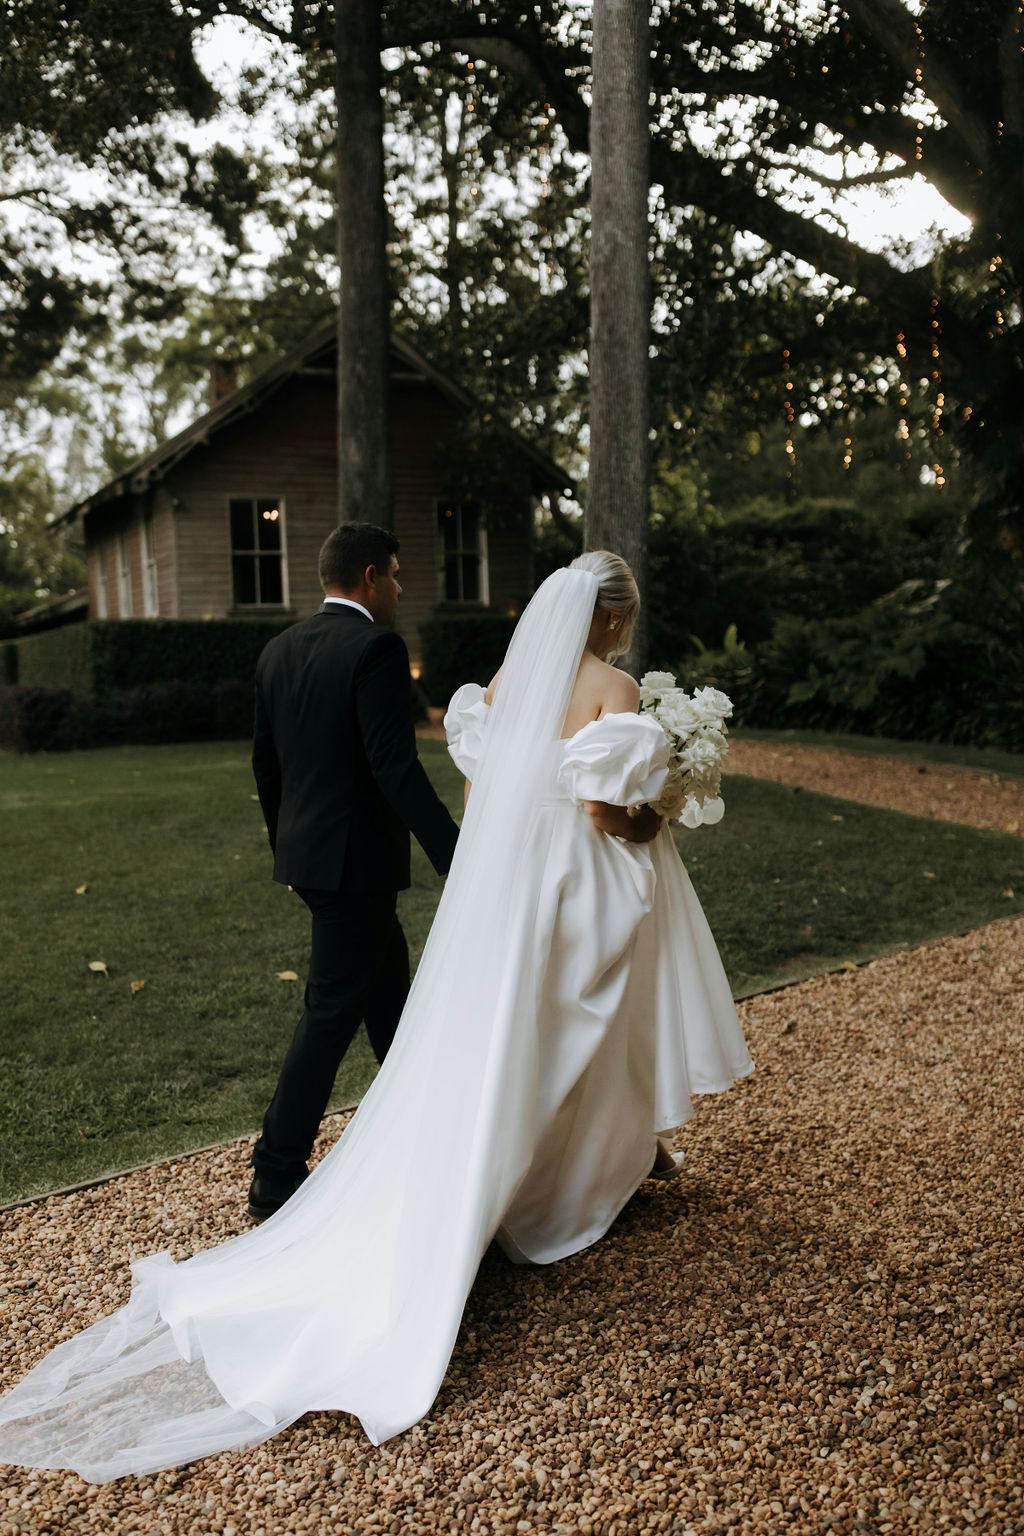 A couple is walking on a gravel path toward a wooden house amidst a lush, green landscape. The bride is wearing a long white gown with a train and holding a bouquet of flowers, while the groom is dressed in a black suit.